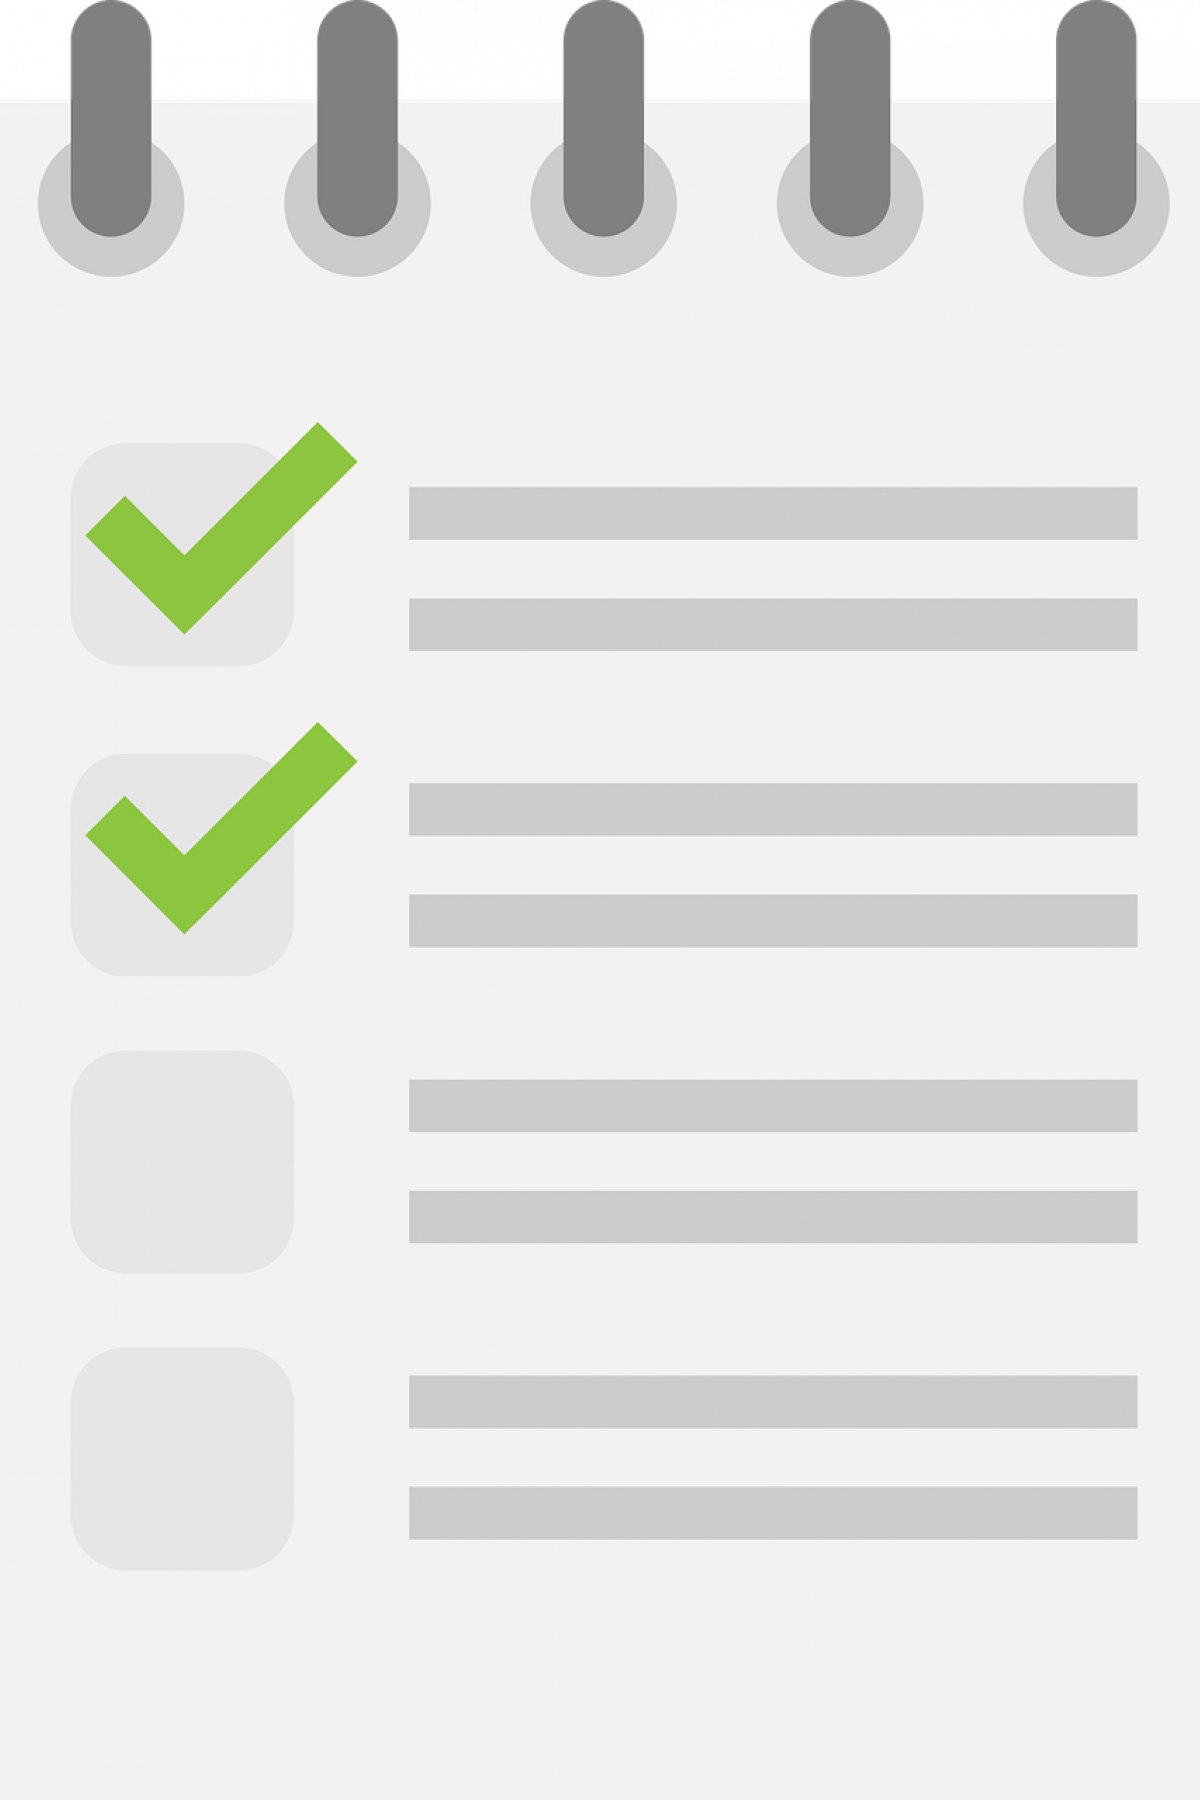 Checklist image with green ticks